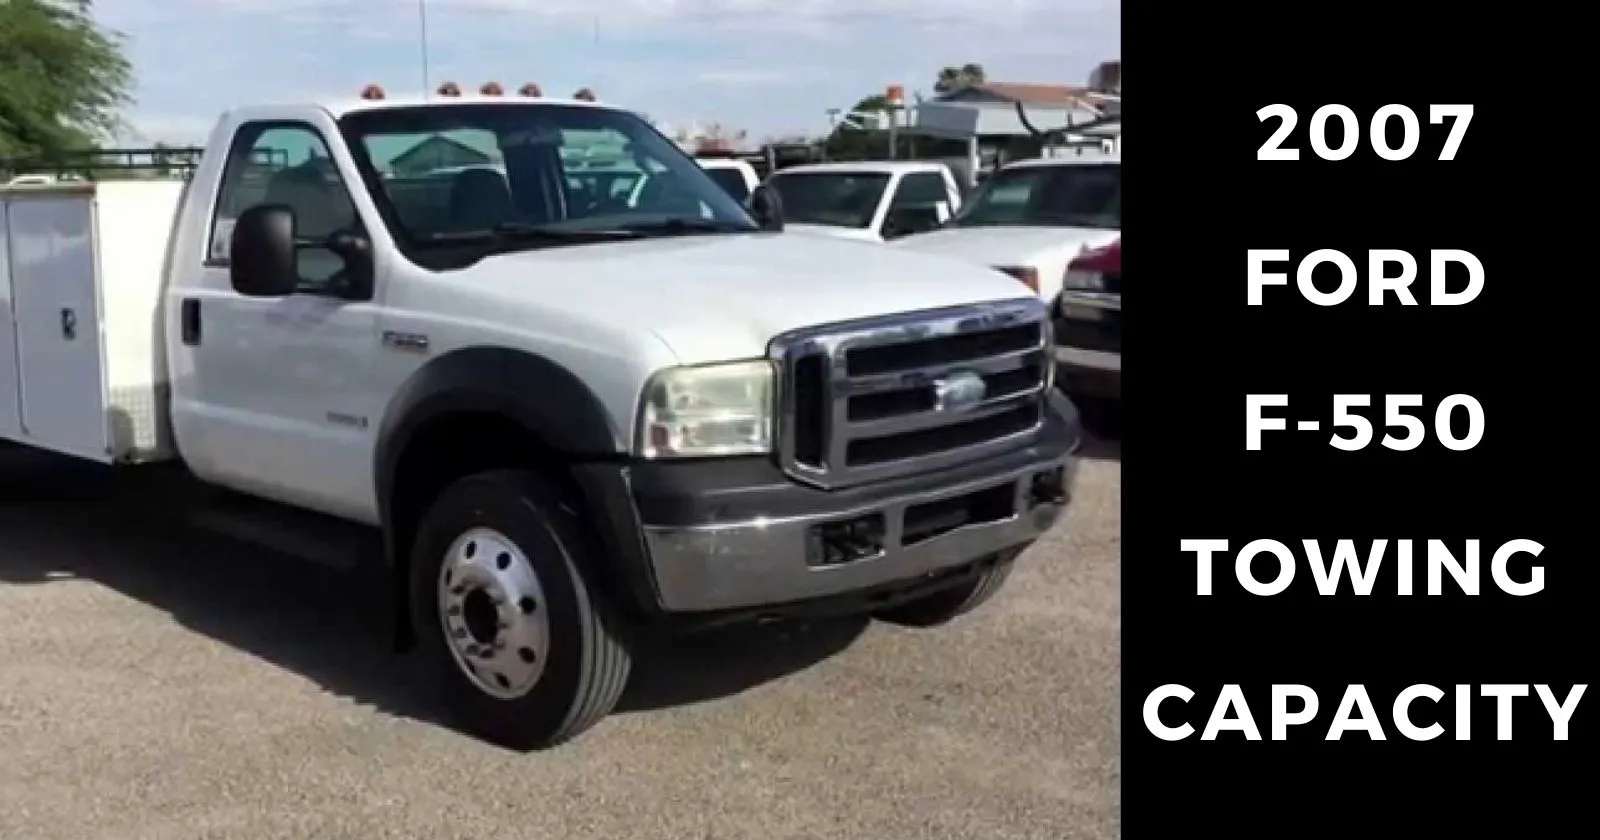 2007-ford-f550-towing-capacity-with-charts-thecartowing